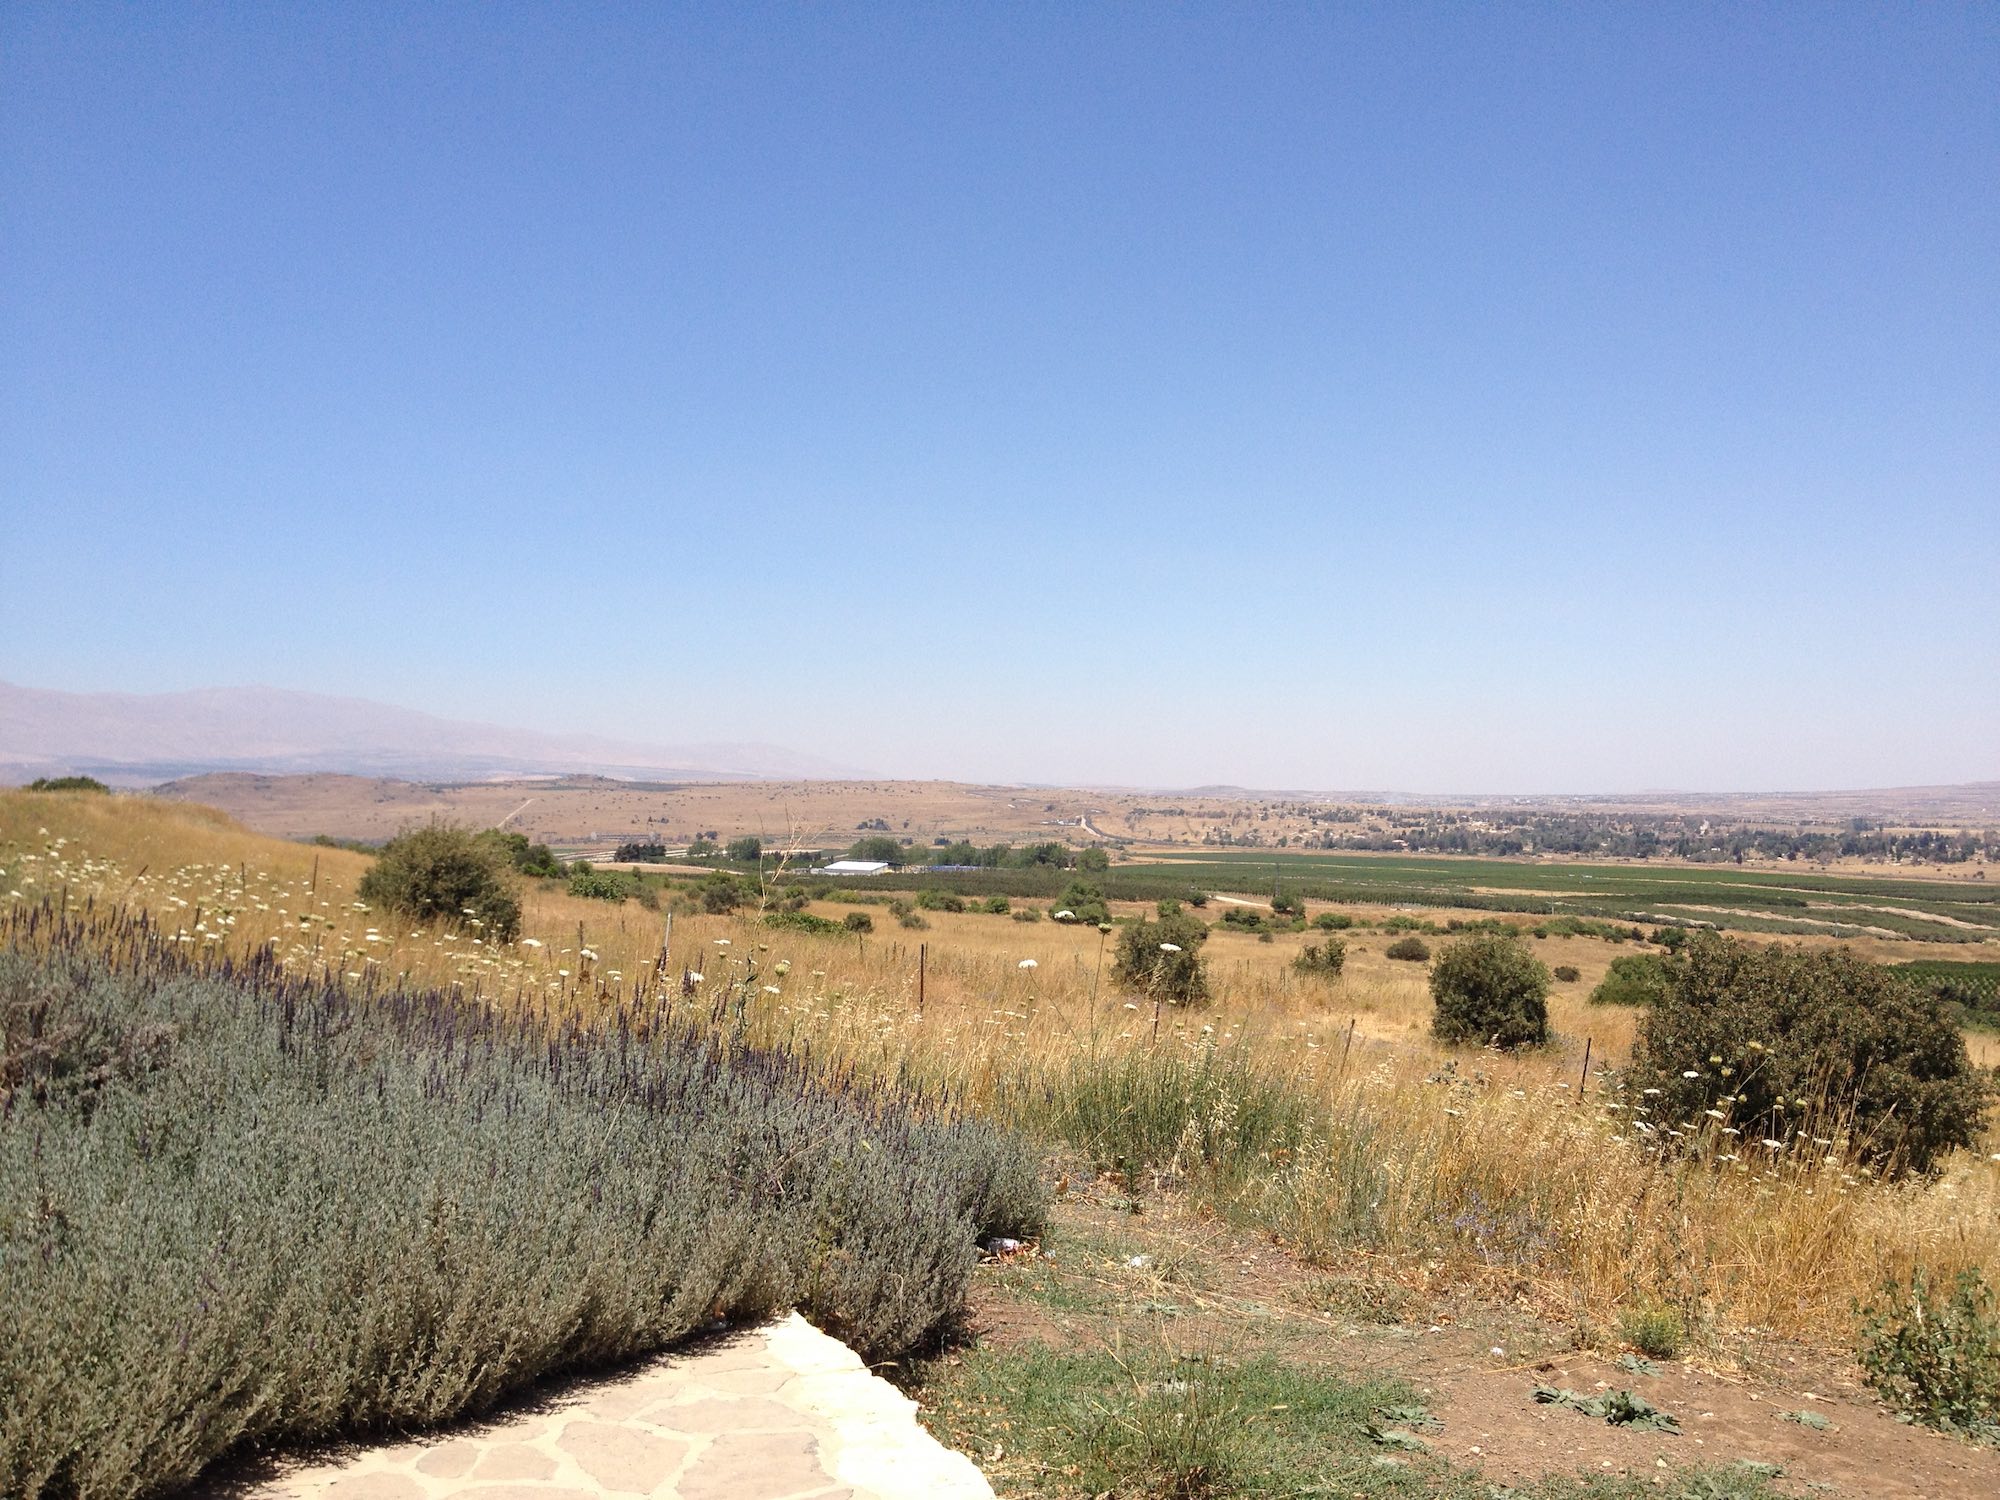 Syria from the UNDOF outpost in the Golan Heights